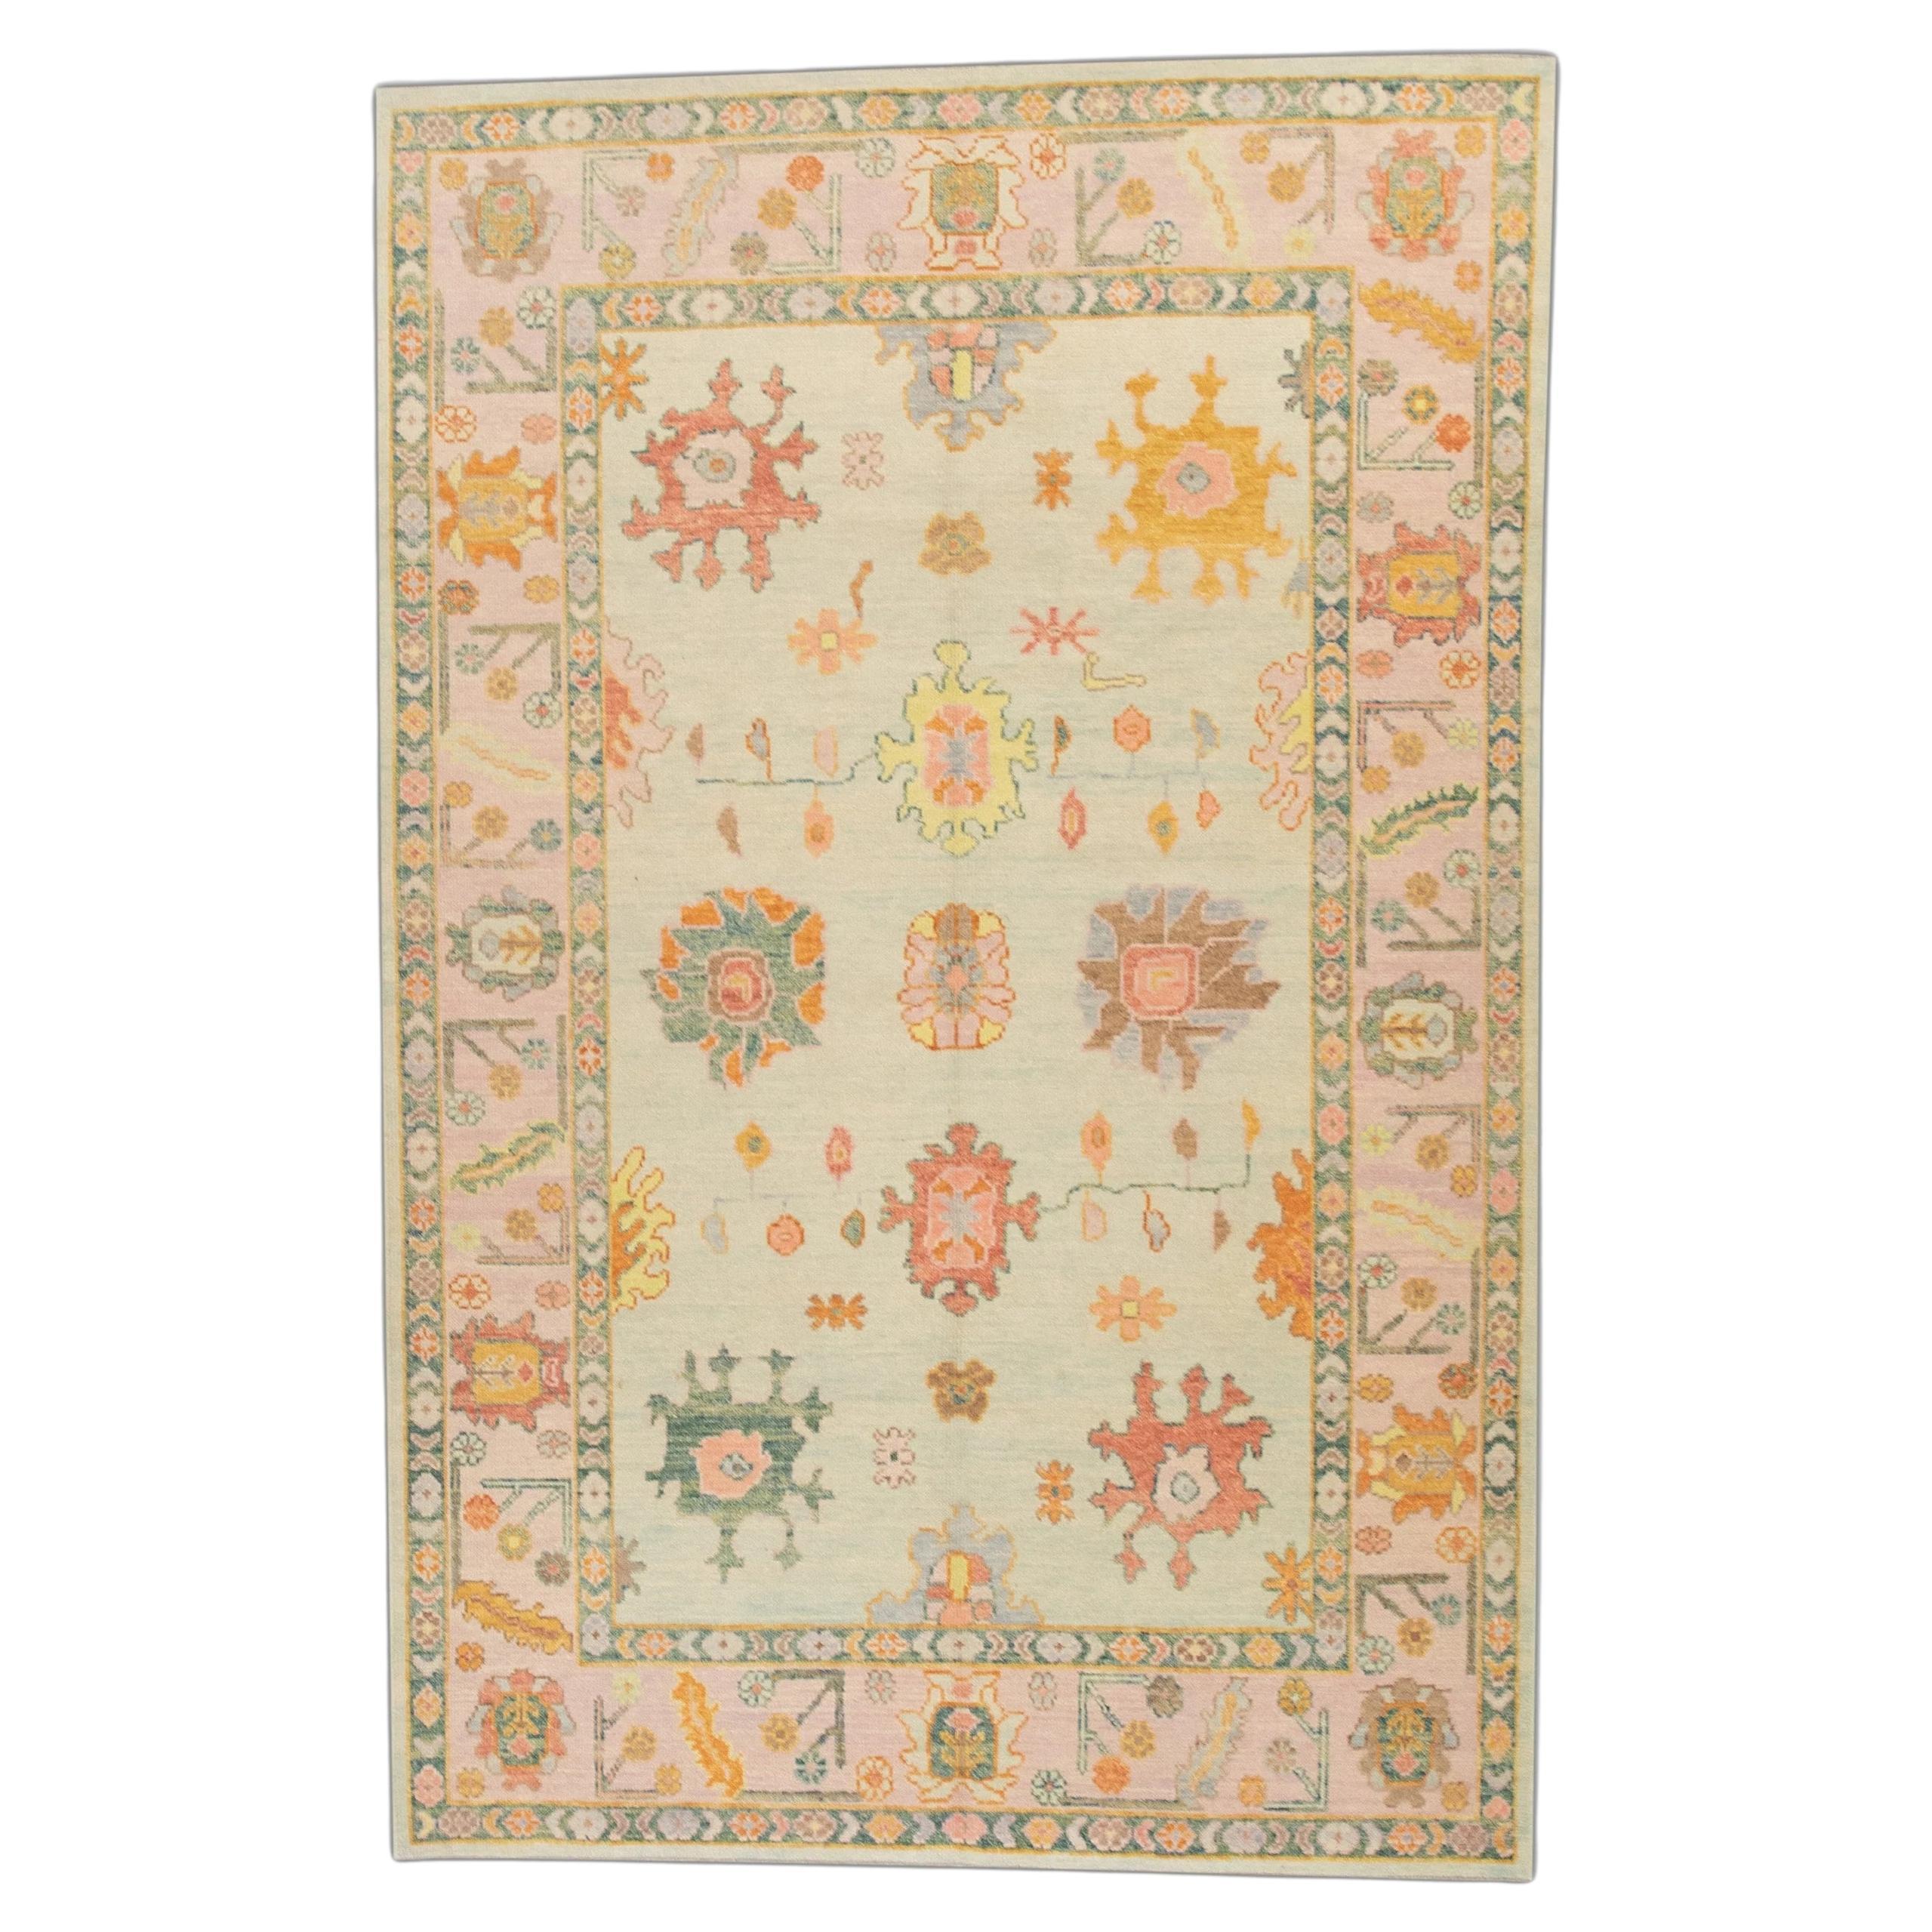 Green and Pink Floral Design Handwoven Wool Turkish Oushak Rug 6' x 9'6" For Sale